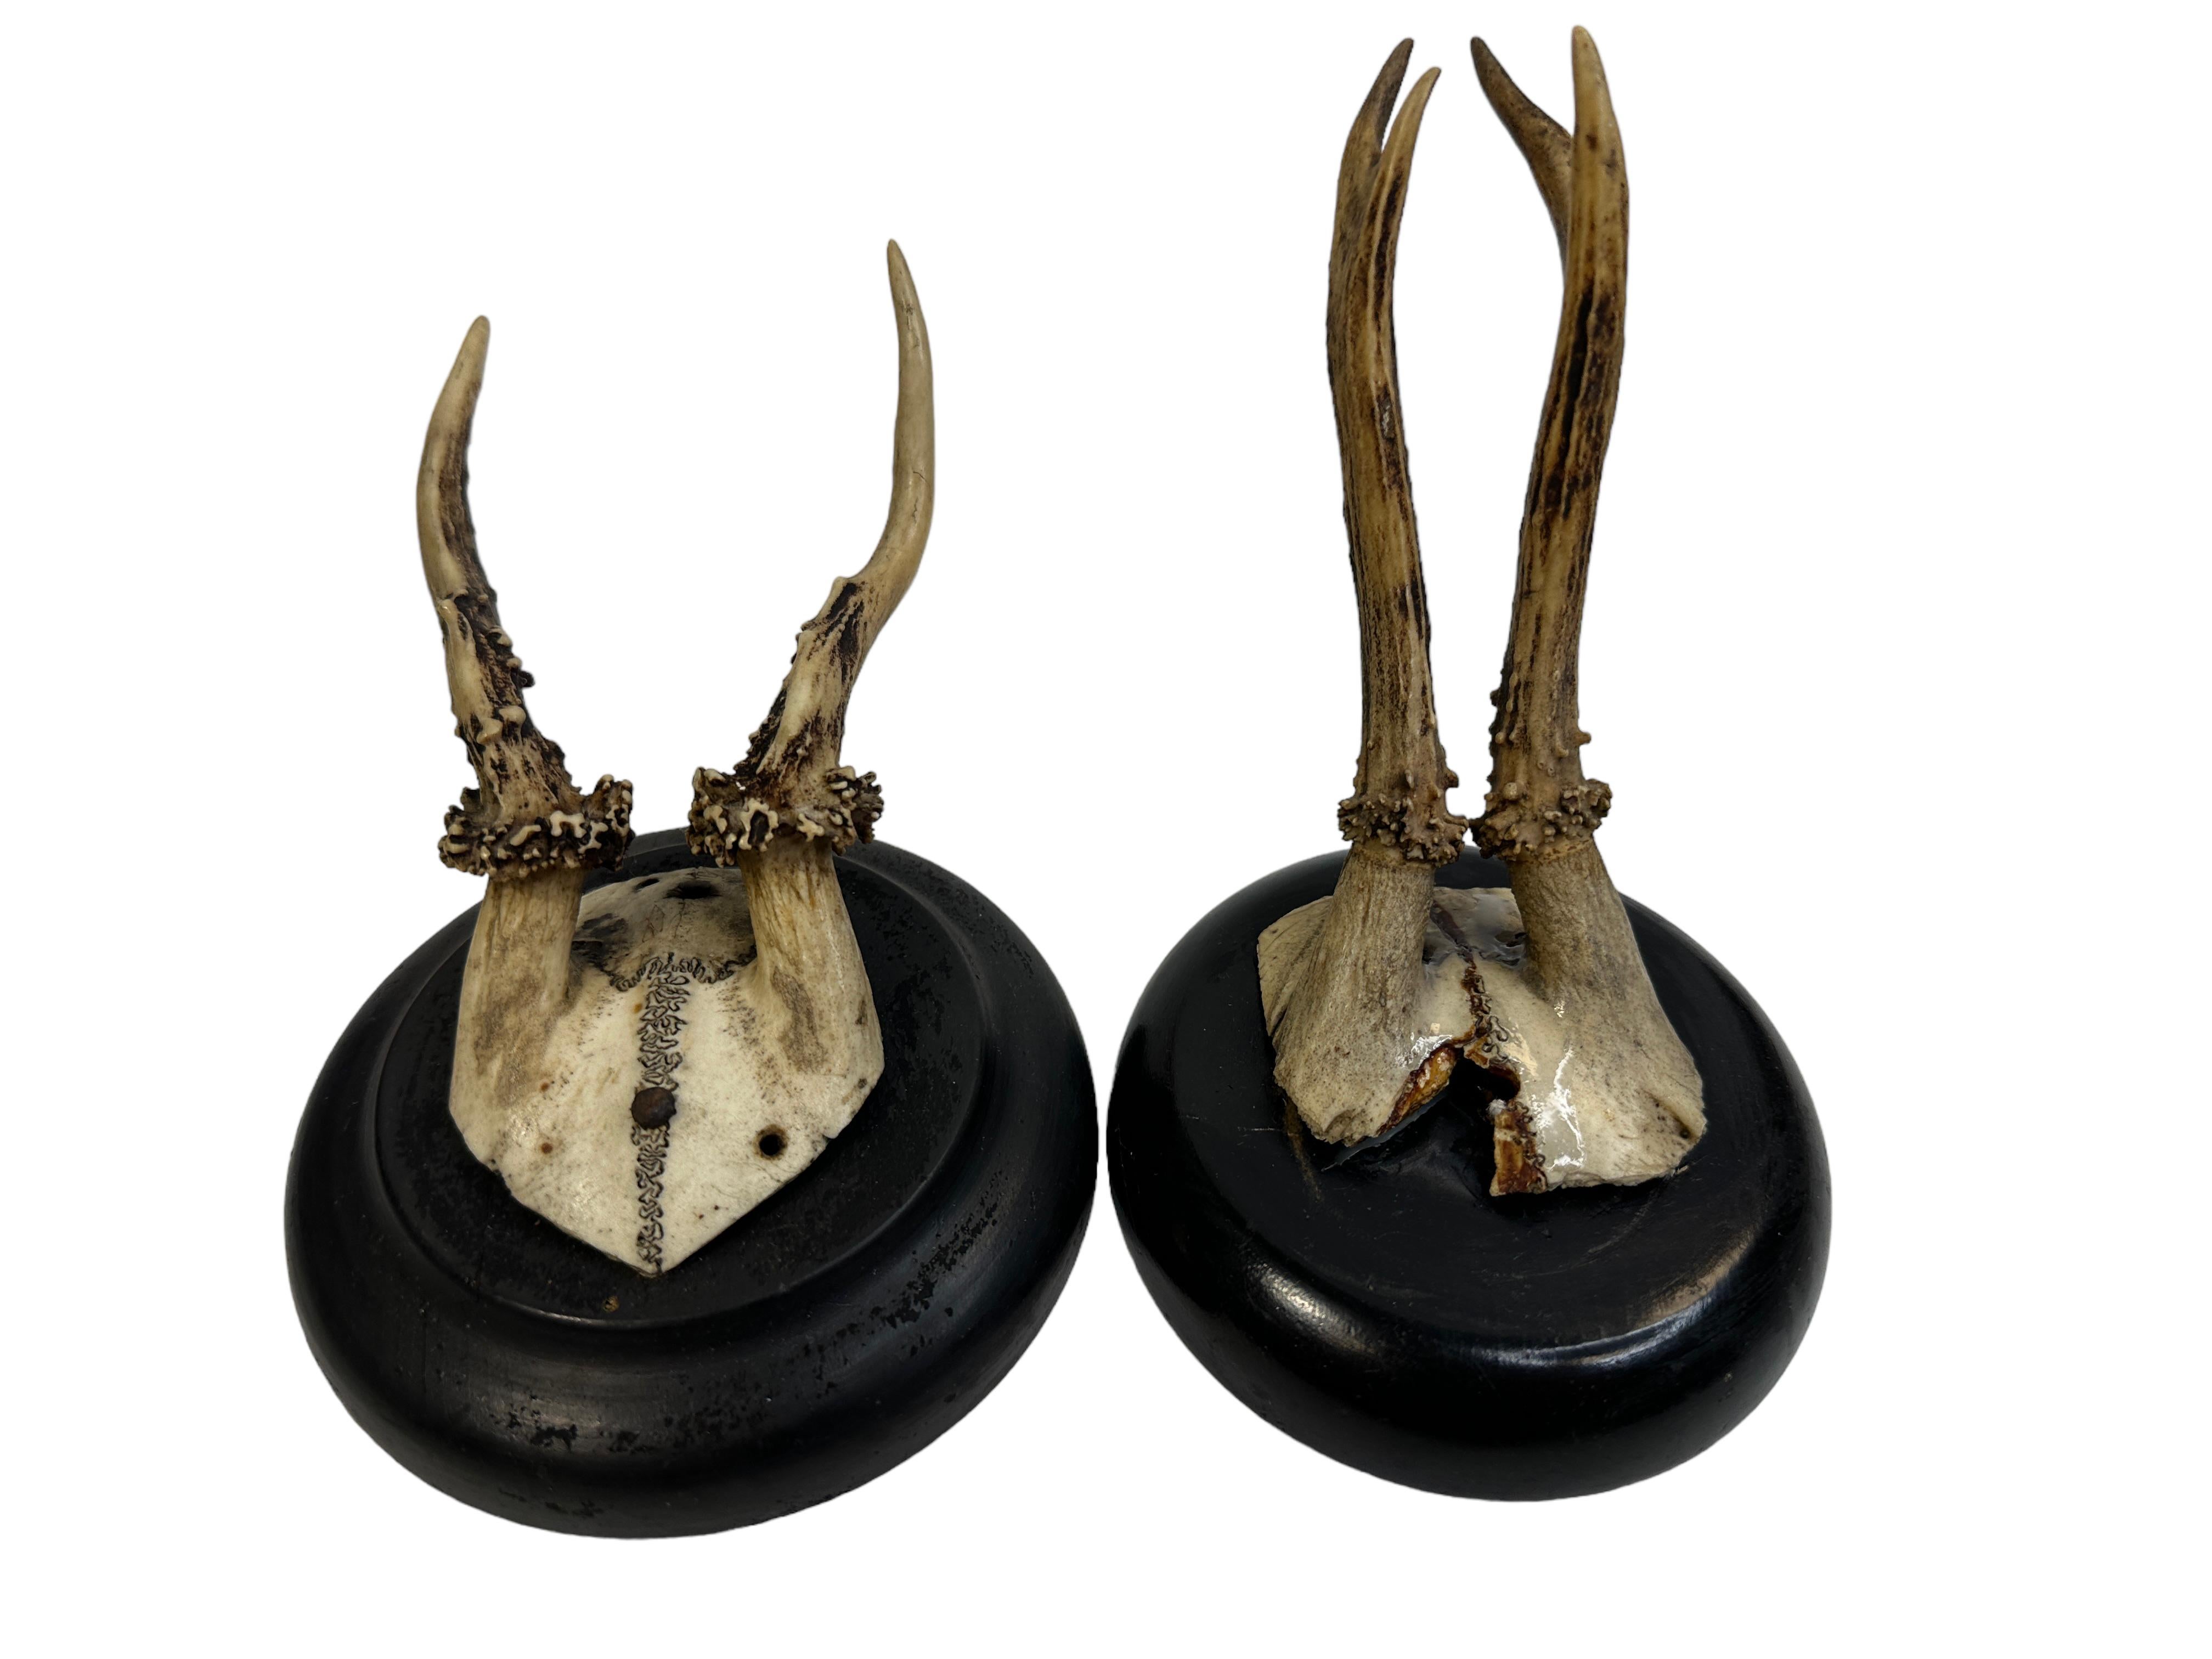 A set of two antique Black Forest deer antler trophies on hand carved, black lacquered wooden plaques. They are from the 1890s or older. The size given in the dimensions section refers to the largest item. A nice addition to your hunters loge or